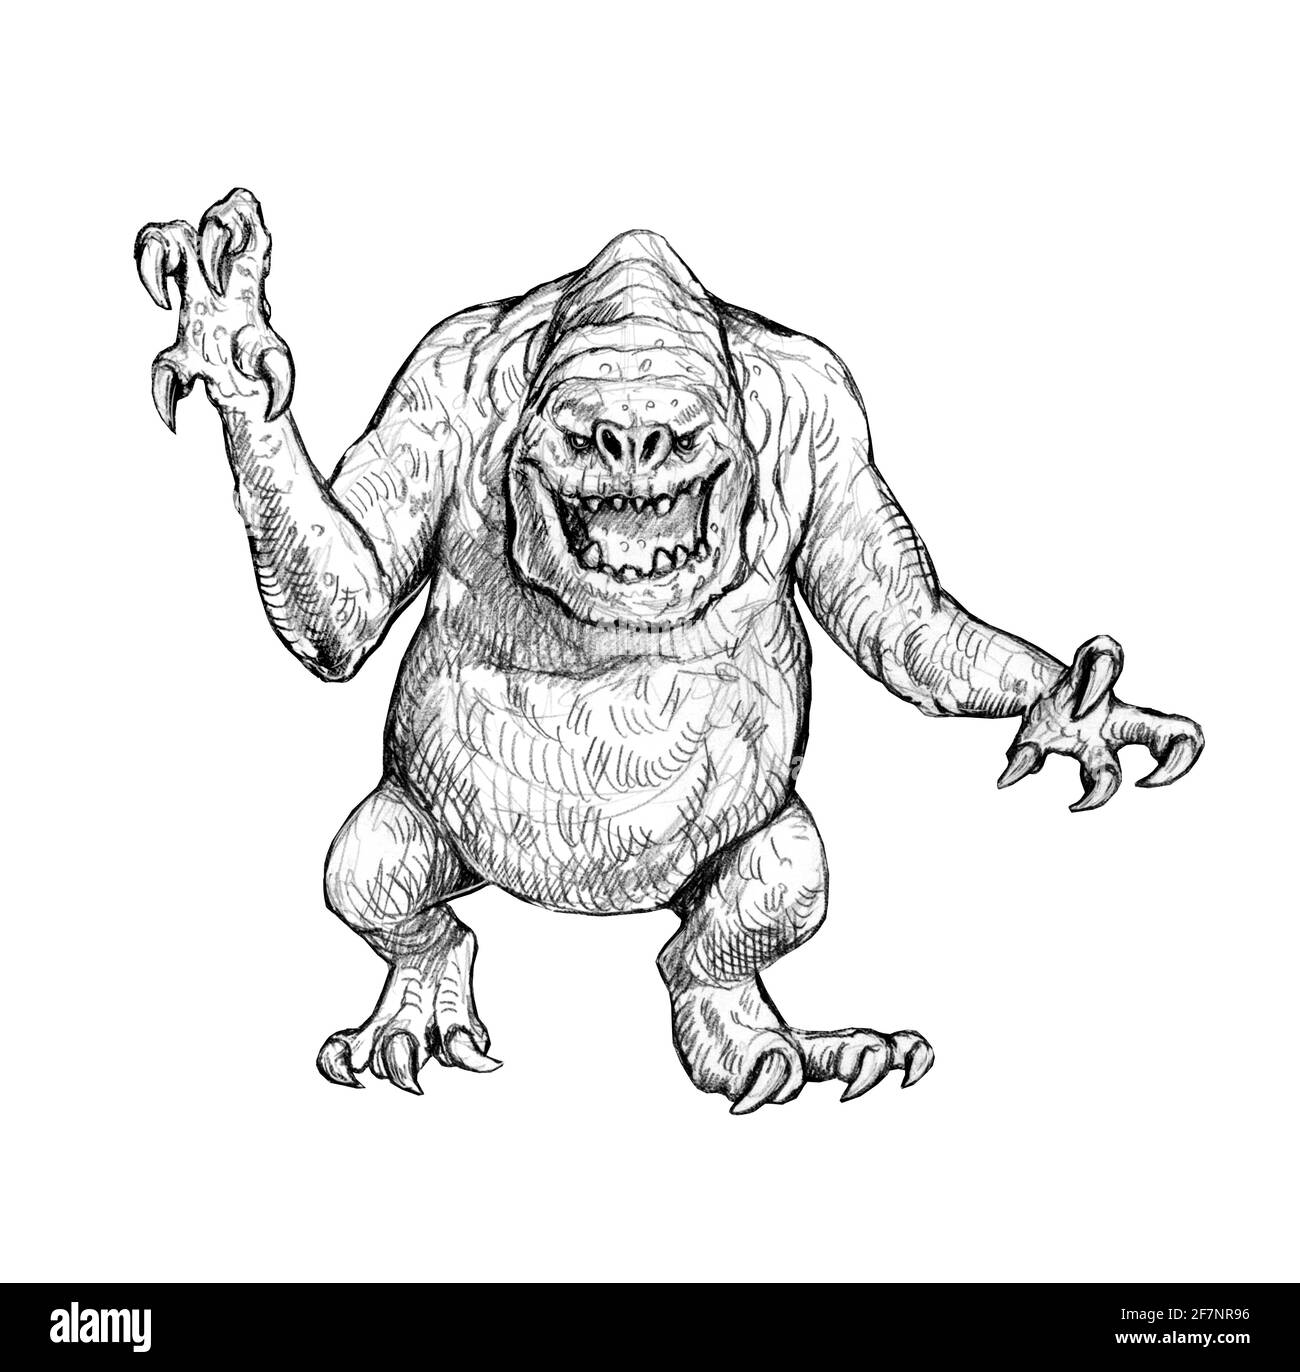 Disgusting monster rancor. Allien pencil drawing. Stock Photo